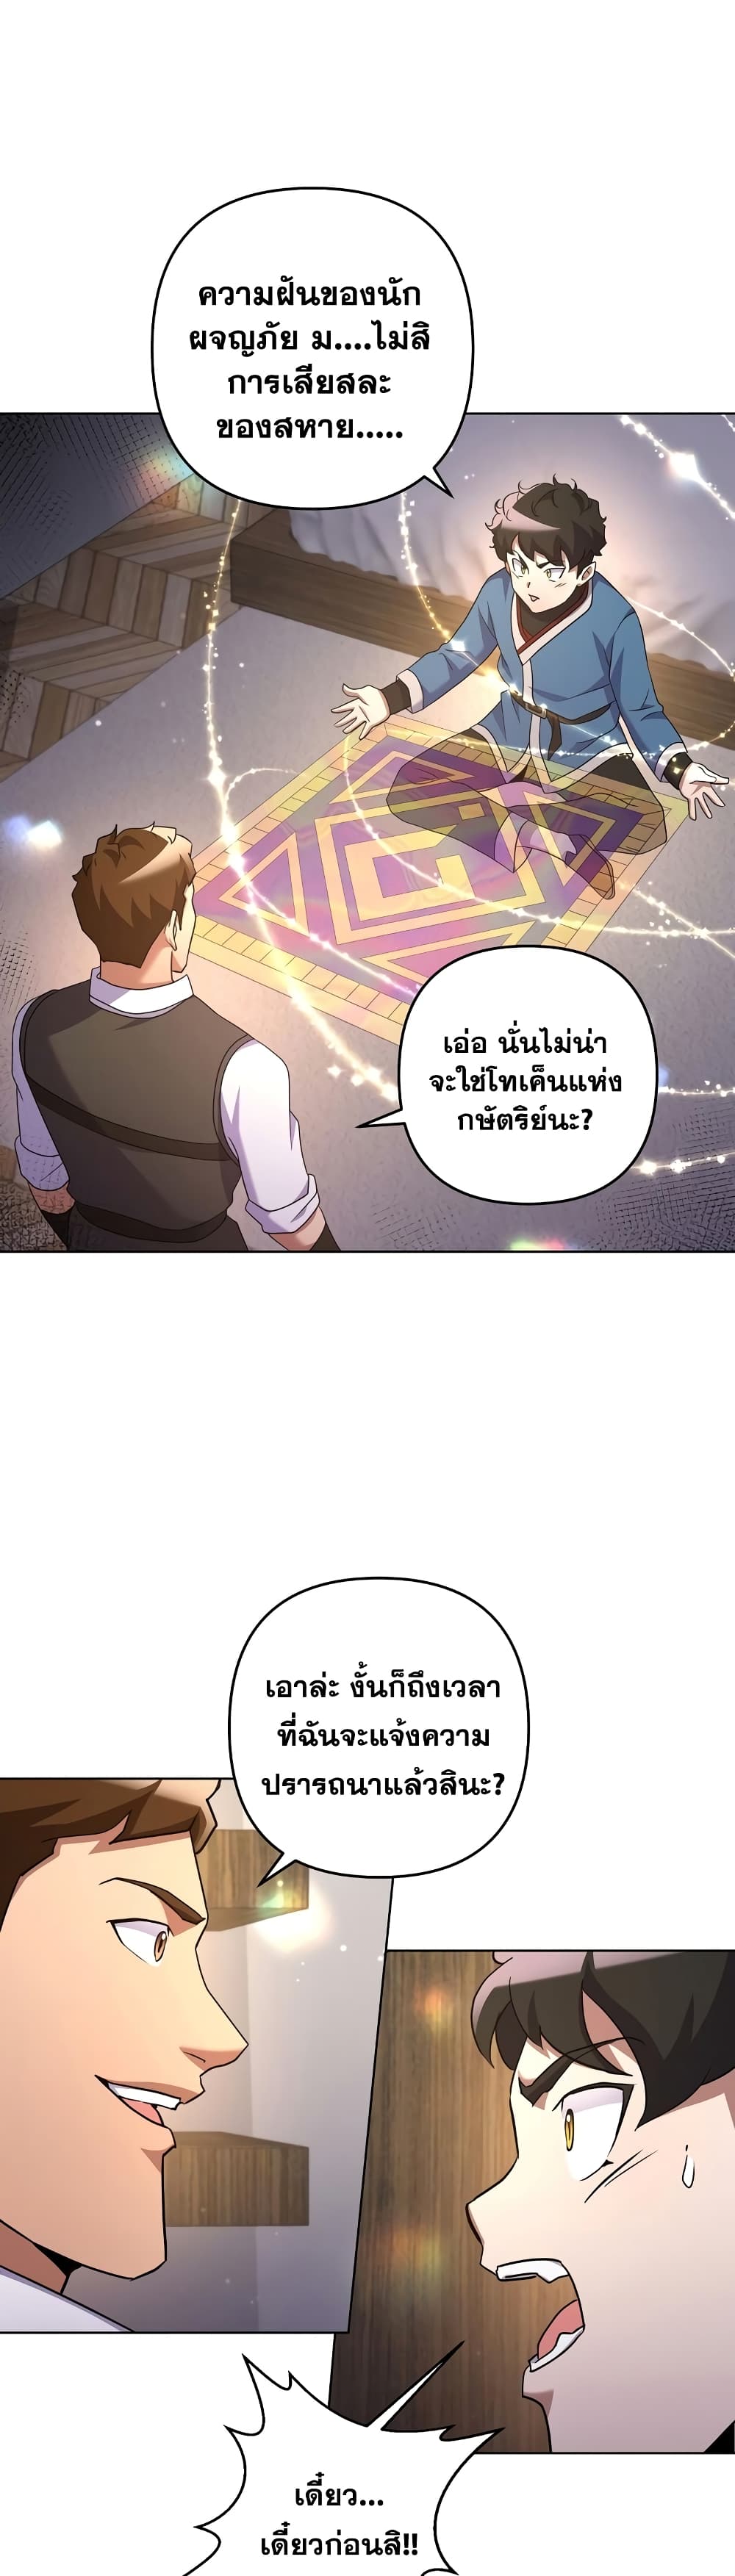 Surviving in an Action Manhwa22 (3)